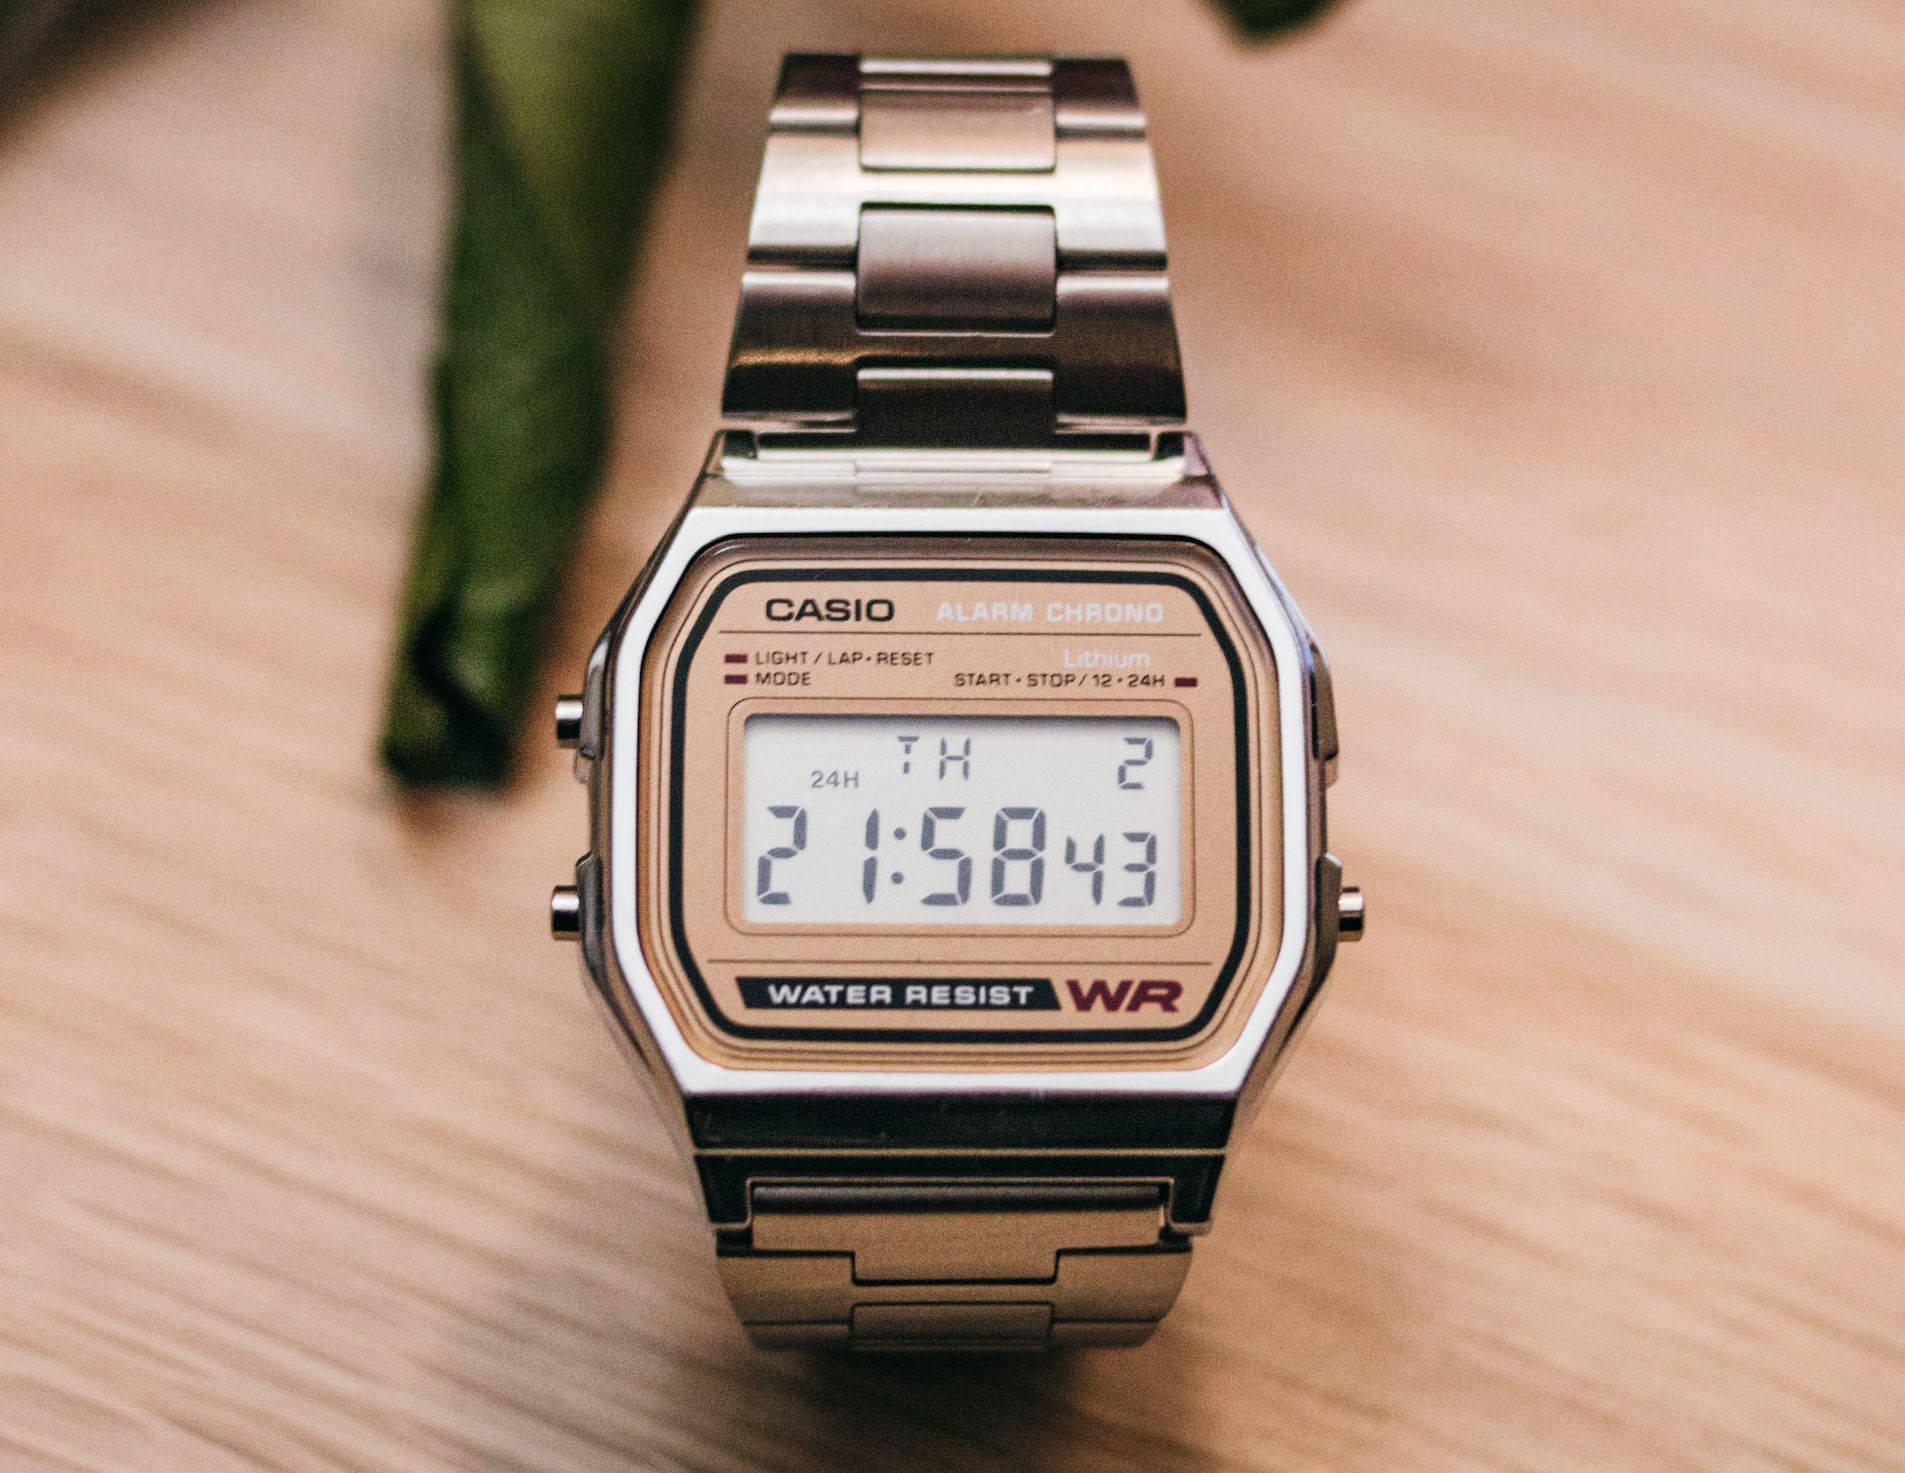 After Apologizes Casio to Cyberattack in Consumers Data Stolen